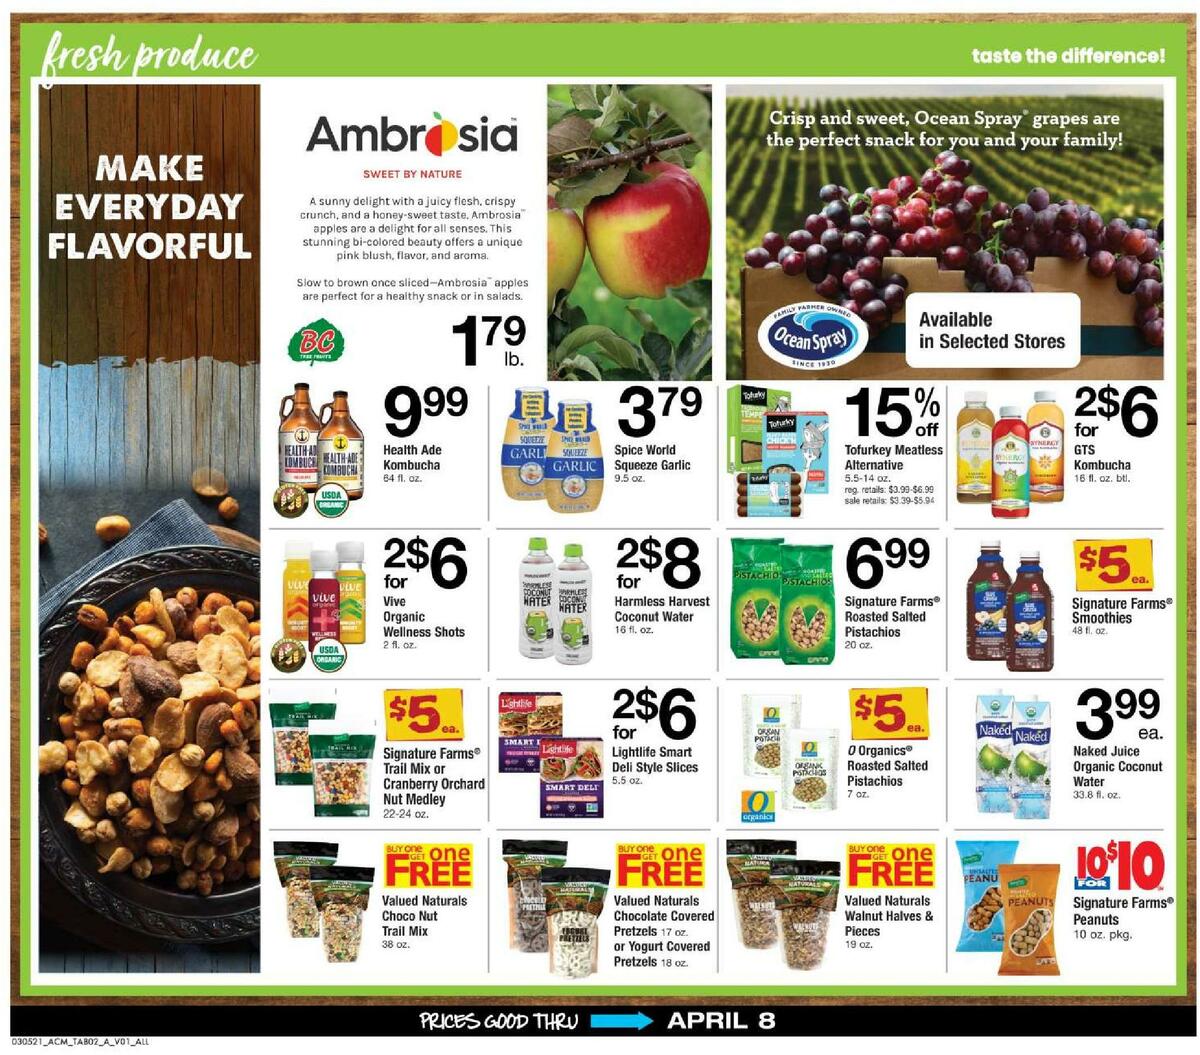 ACME Markets Big Book of Savings specials Weekly Ad from March 5